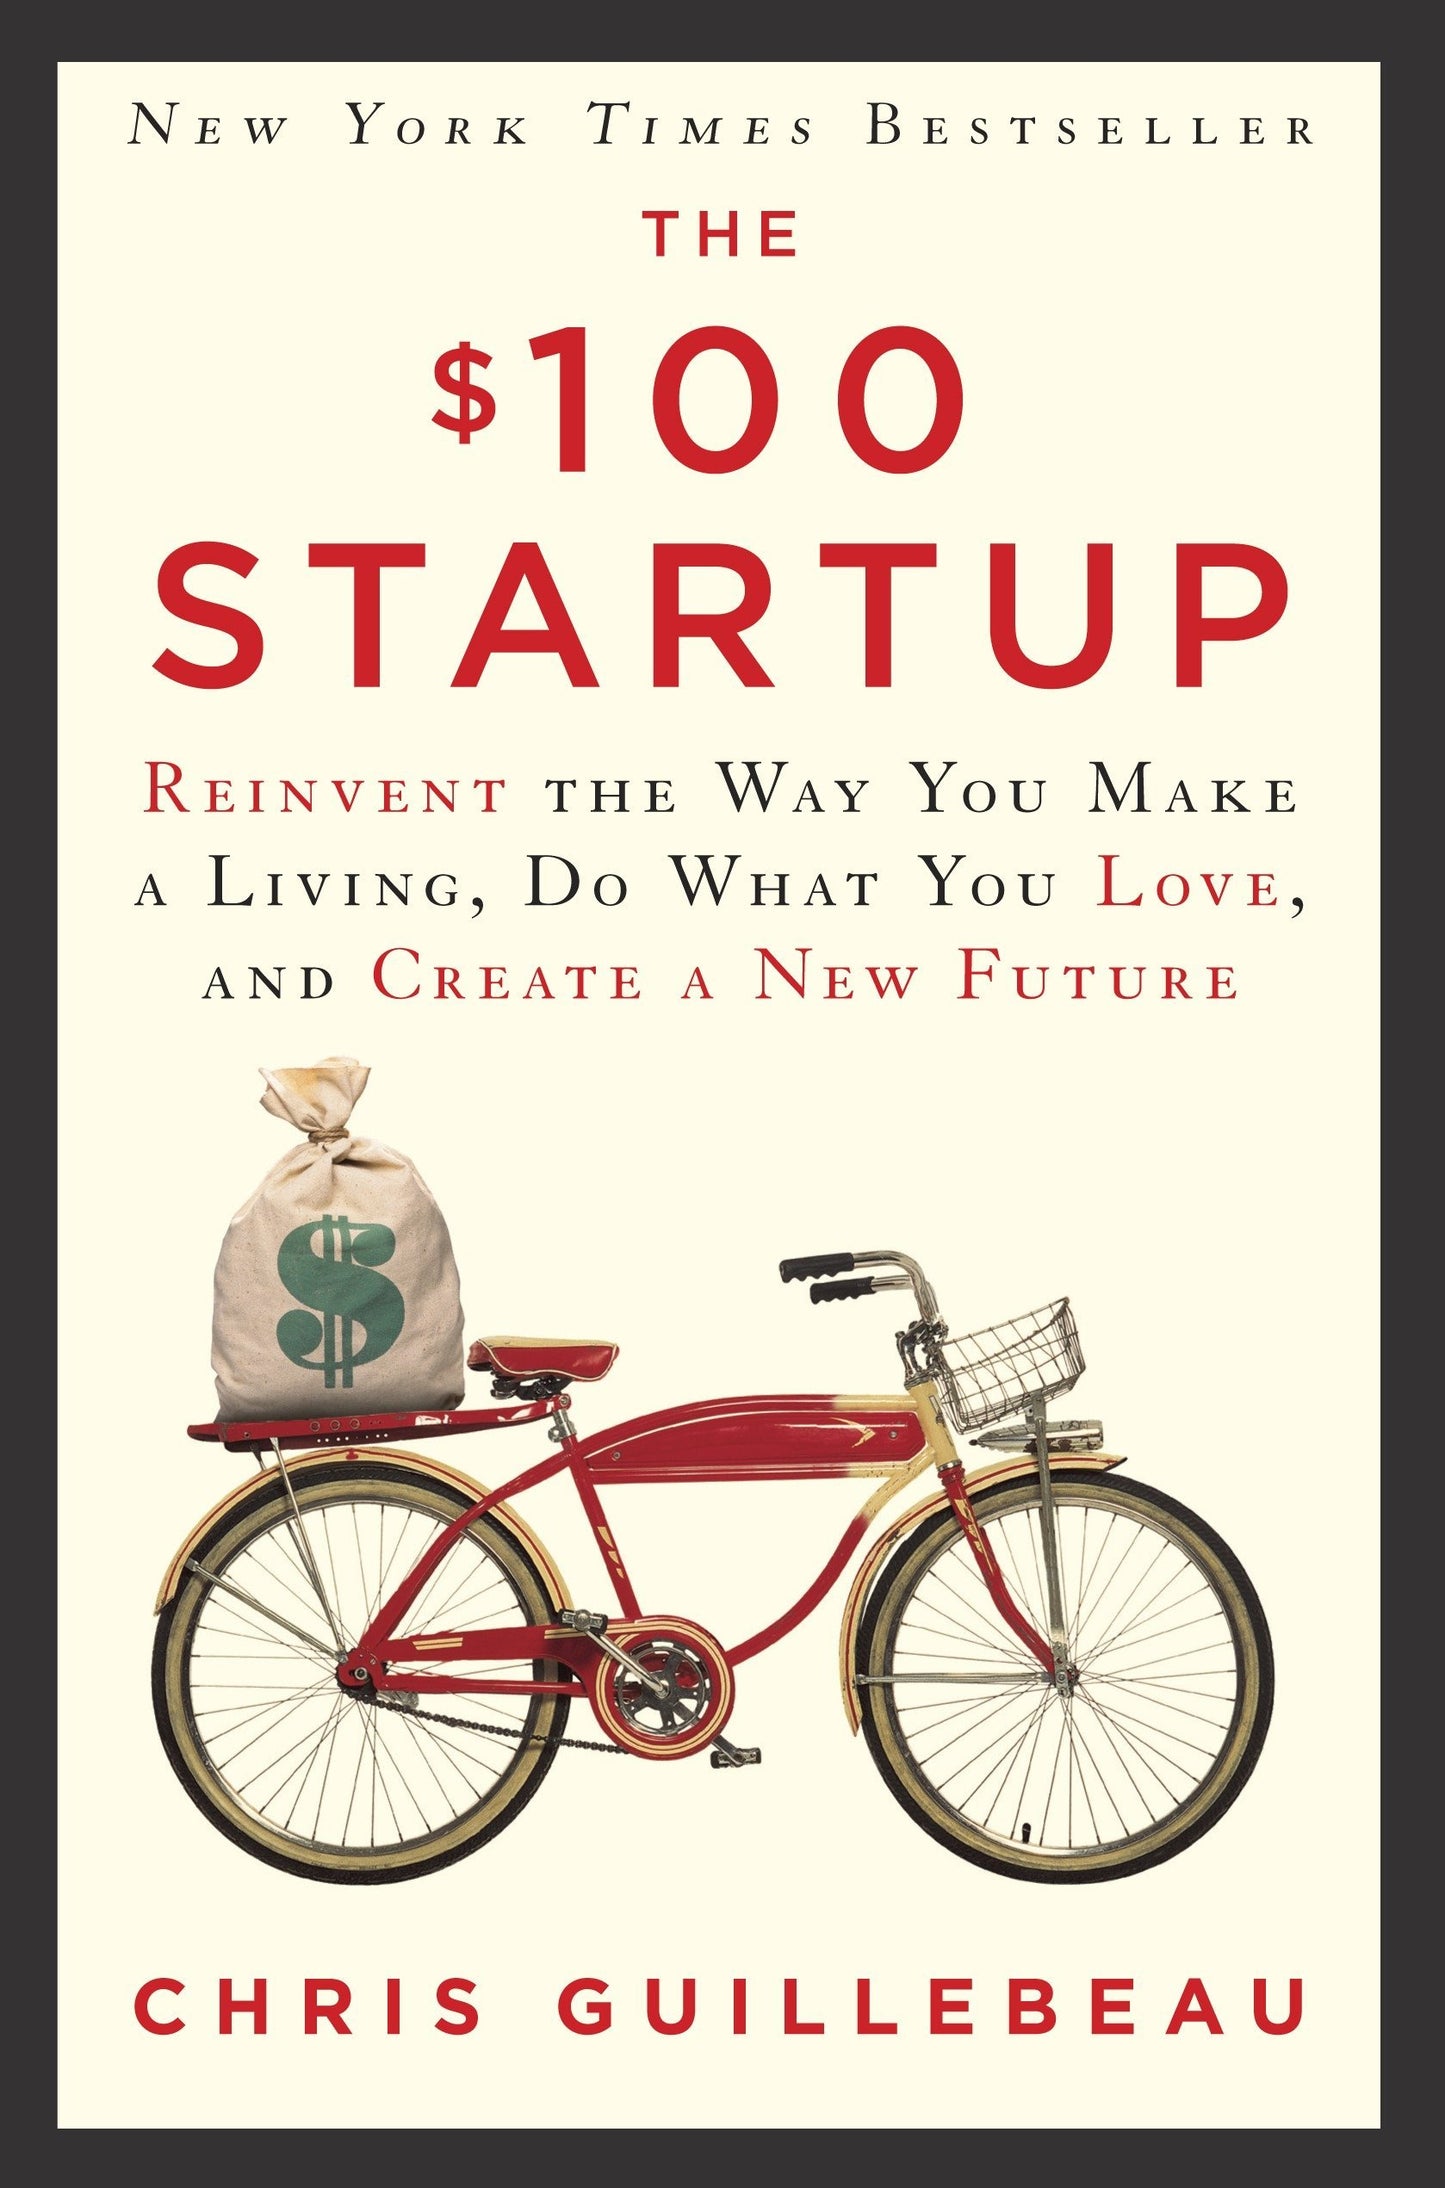 $100 Startup: Reinvent the Way You Make a Living, Do What You Love, and Create a New Future